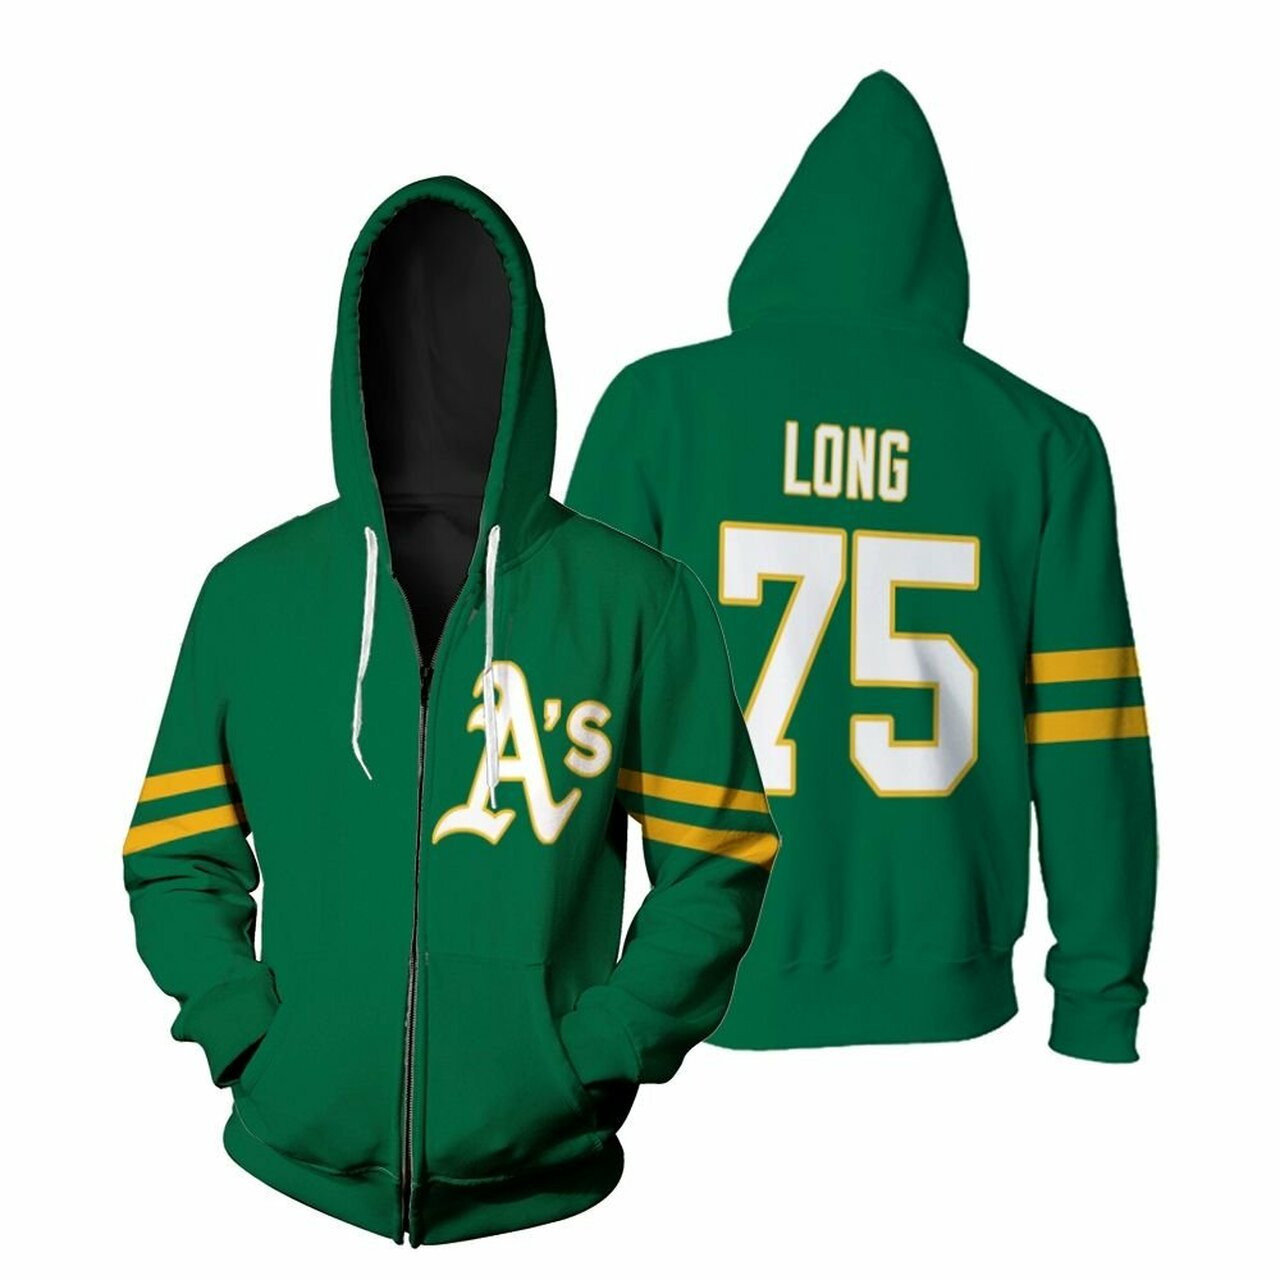 Oakland Athletics Terrence Long 75 Mlb Baseball Team 2019 Green Jersey Style Gift For Athletics Fans Zip Hoodie